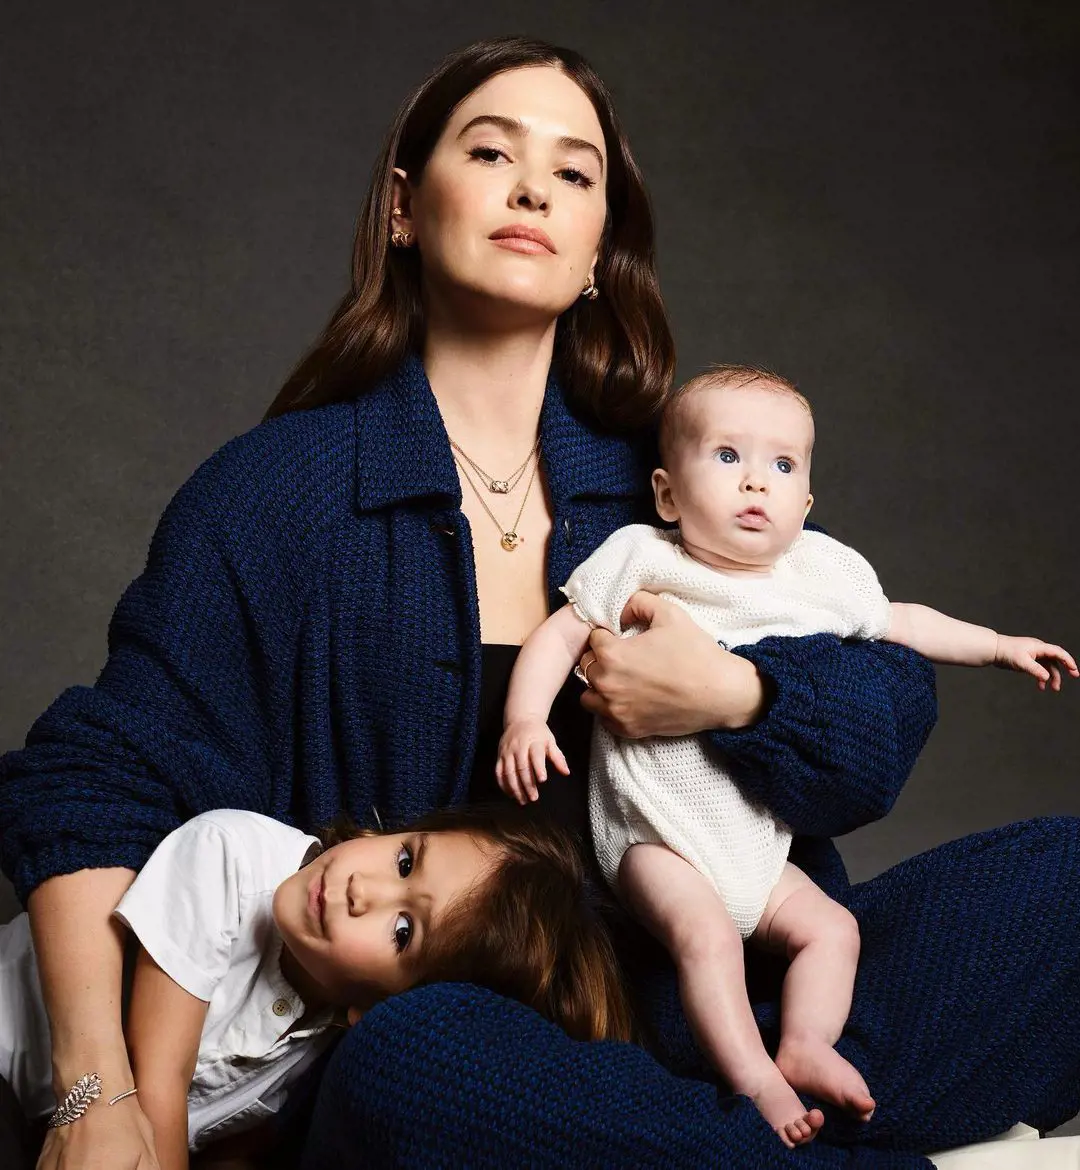 Paola Alberdi and her two kids Enzo and Franco were featured in Chanel during the Mother's day photoshoot.